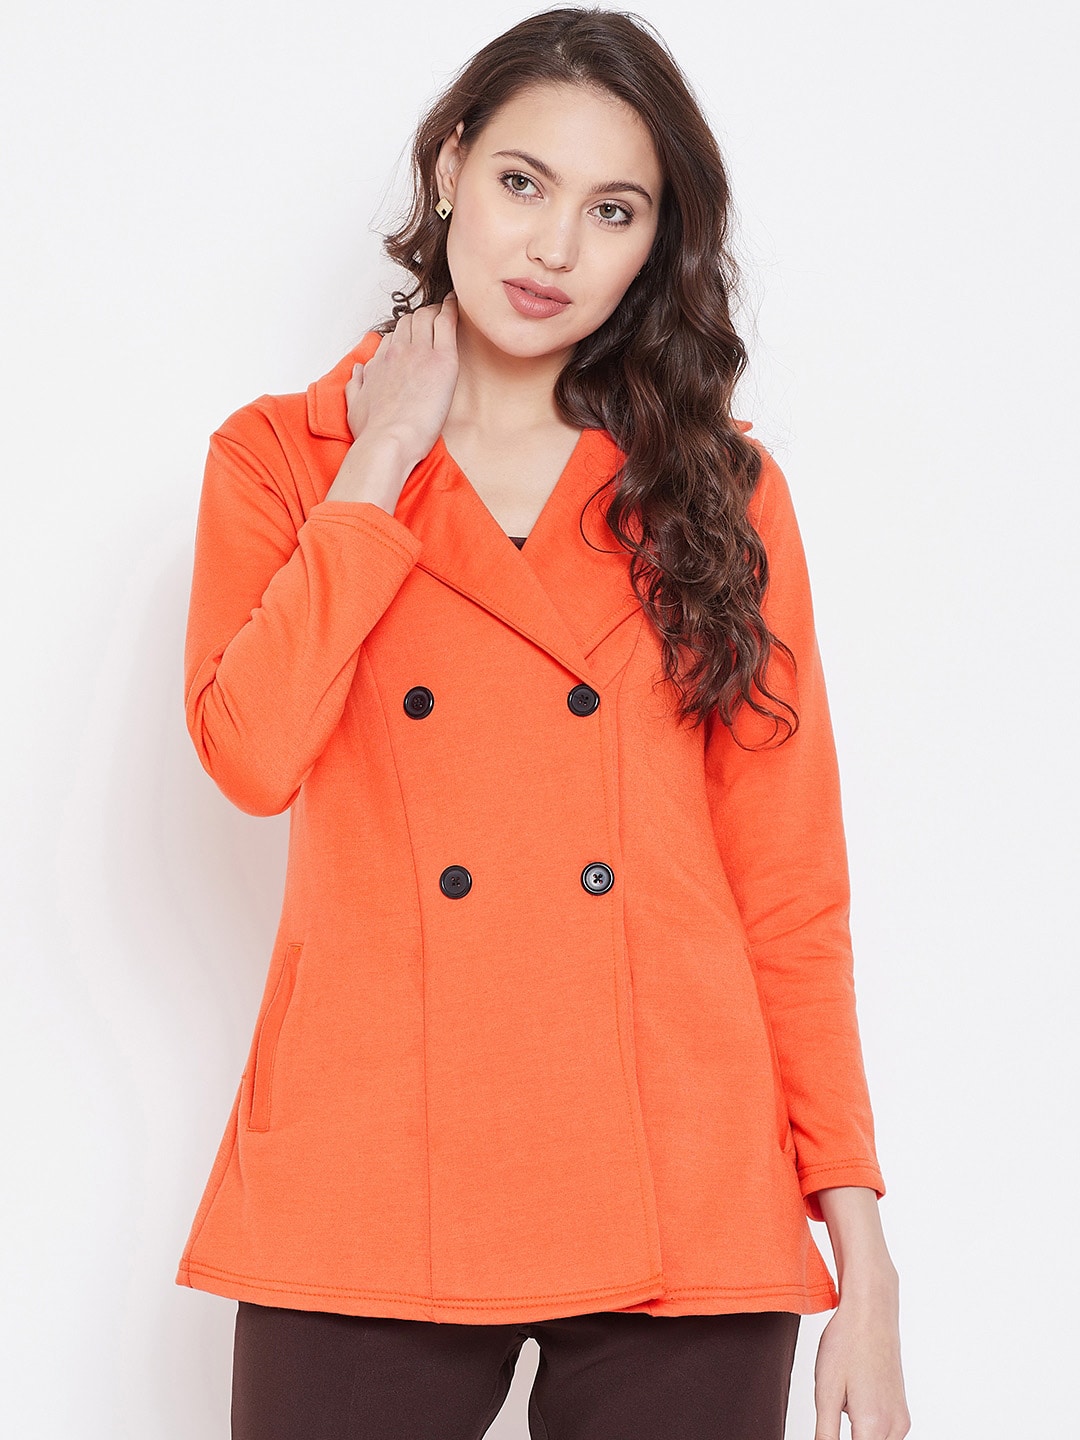 Belle Fille Women Orange Double-Breasted Solid Jacket Price in India